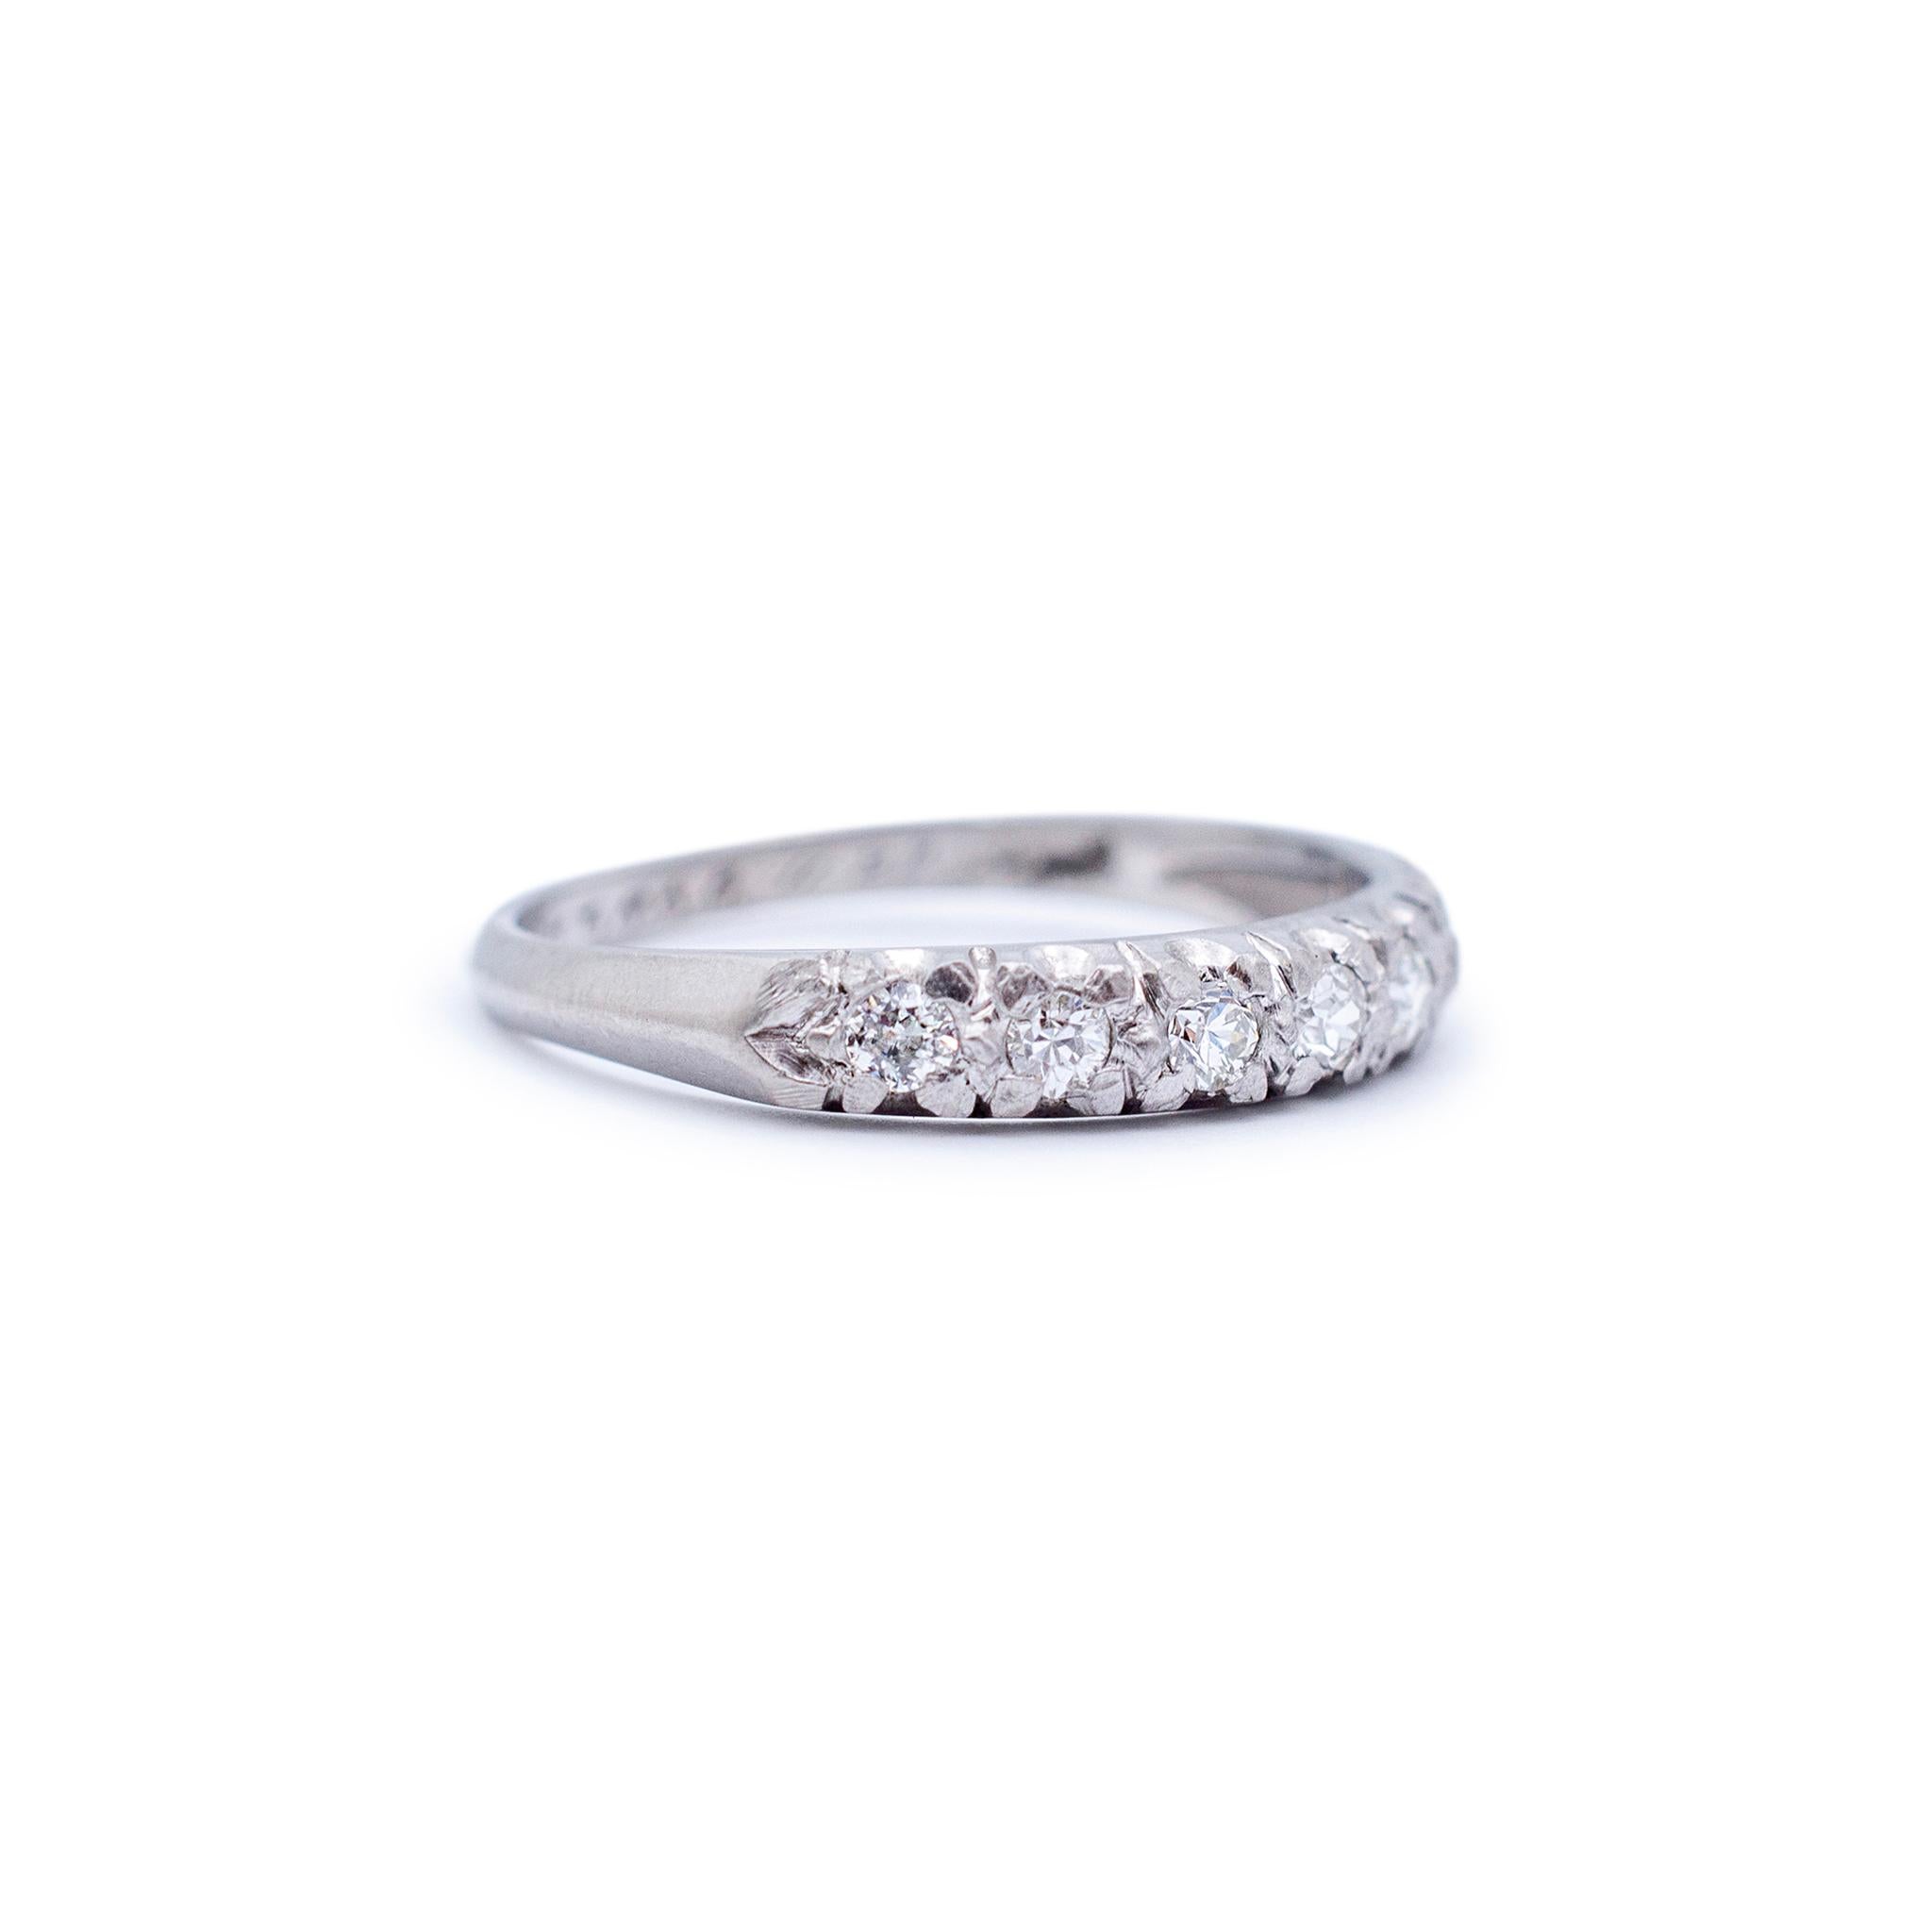 Antique Platinum Old European Diamond Wedding Band In Excellent Condition For Sale In Houston, TX